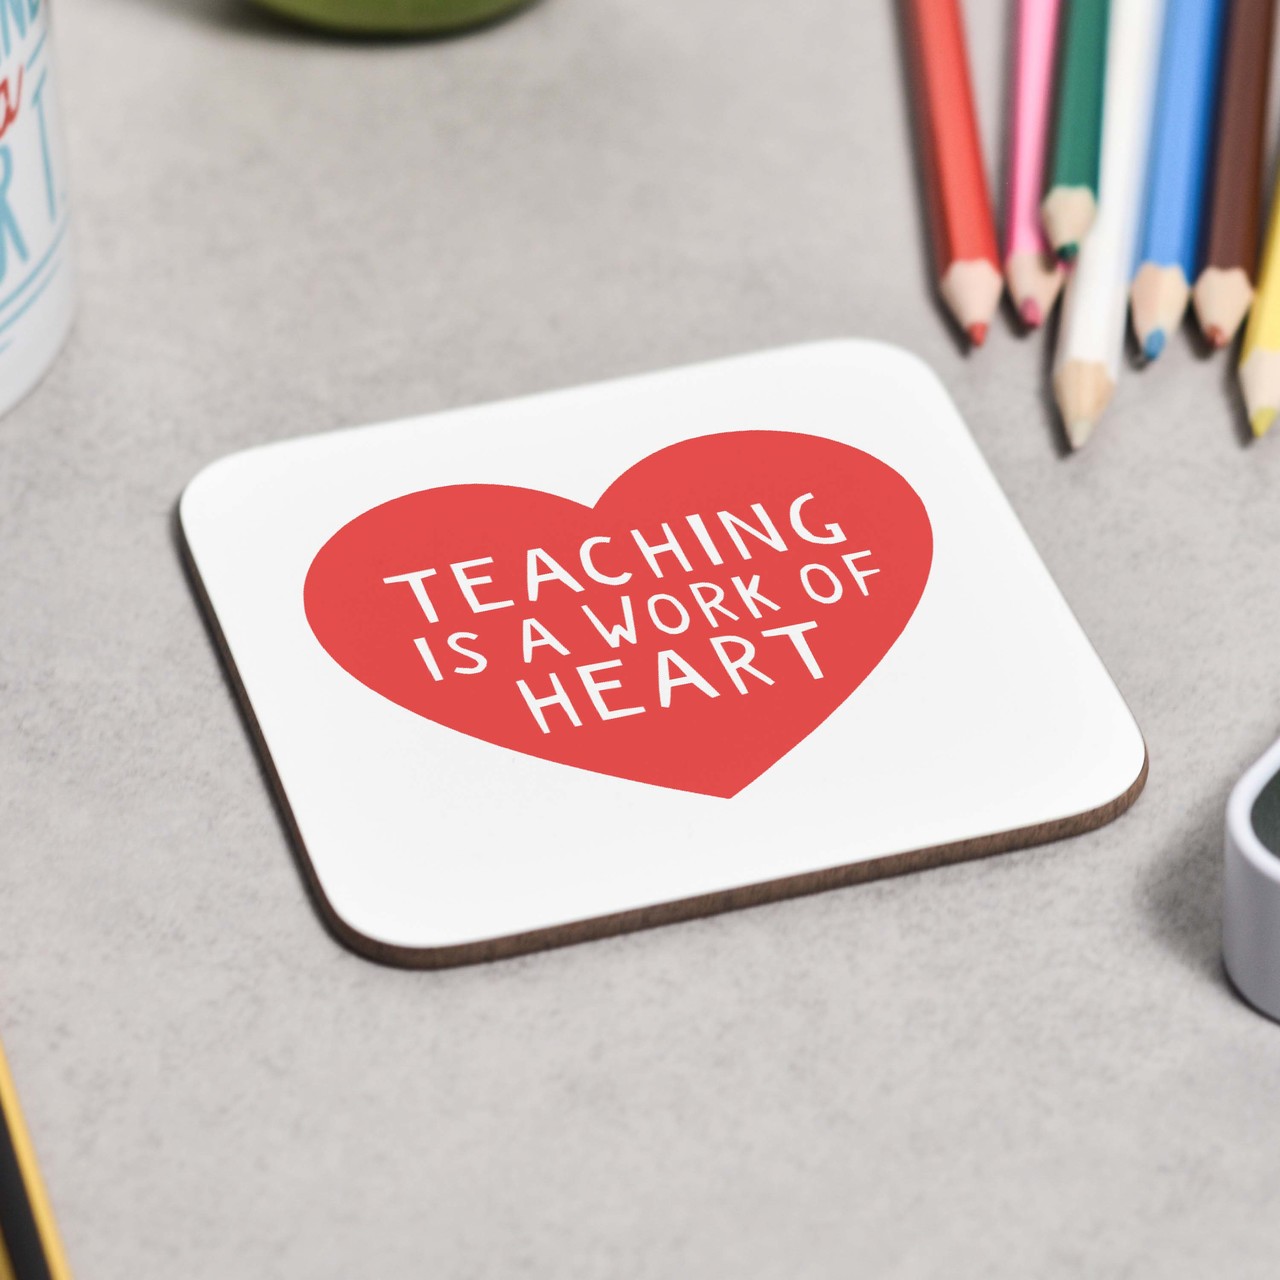 Teaching is a work of heart Coaster